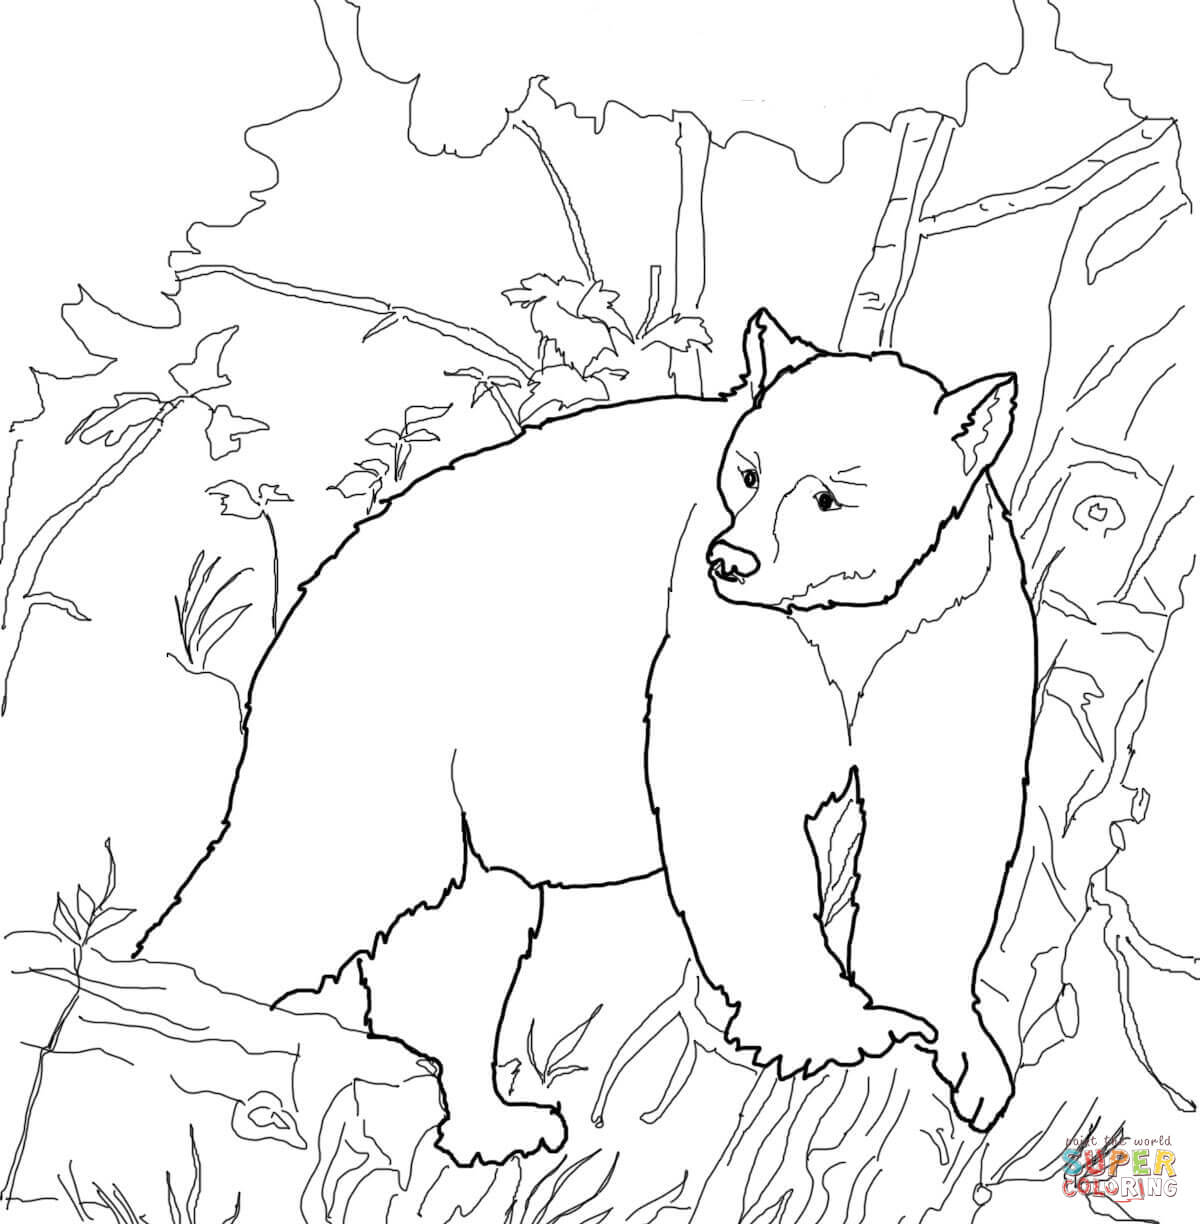 Coloring Pages Of Black Bears American Black Bears Coloring Pages Free Coloring Pages